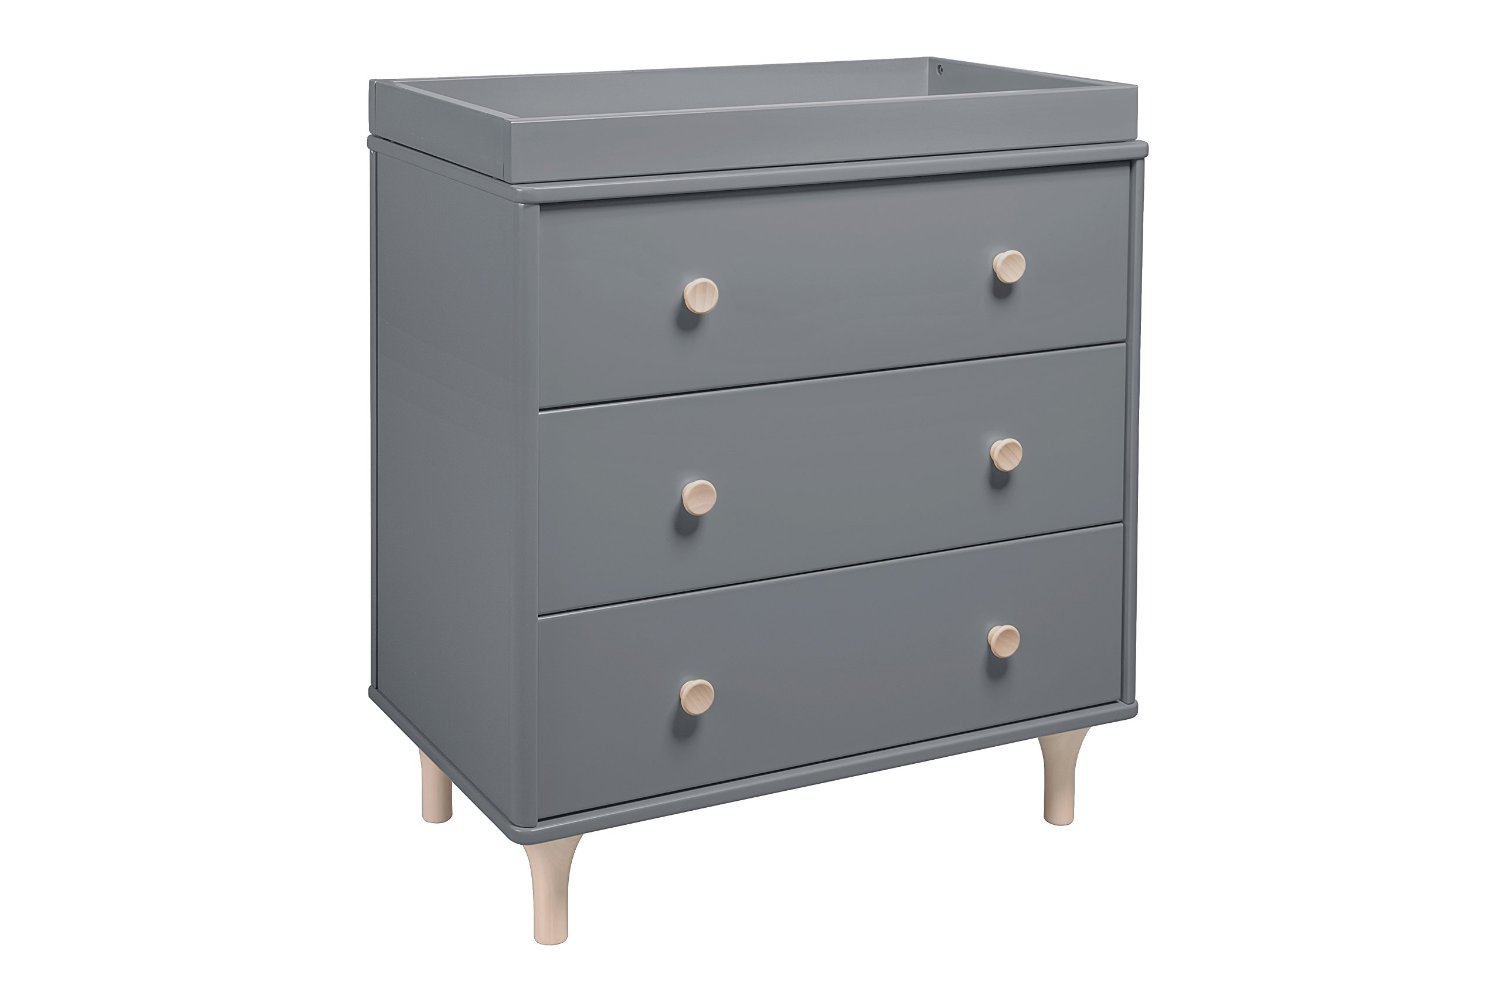 BabyLetto Lolly 3 Drawer Dresser Changer, Grey and Natural